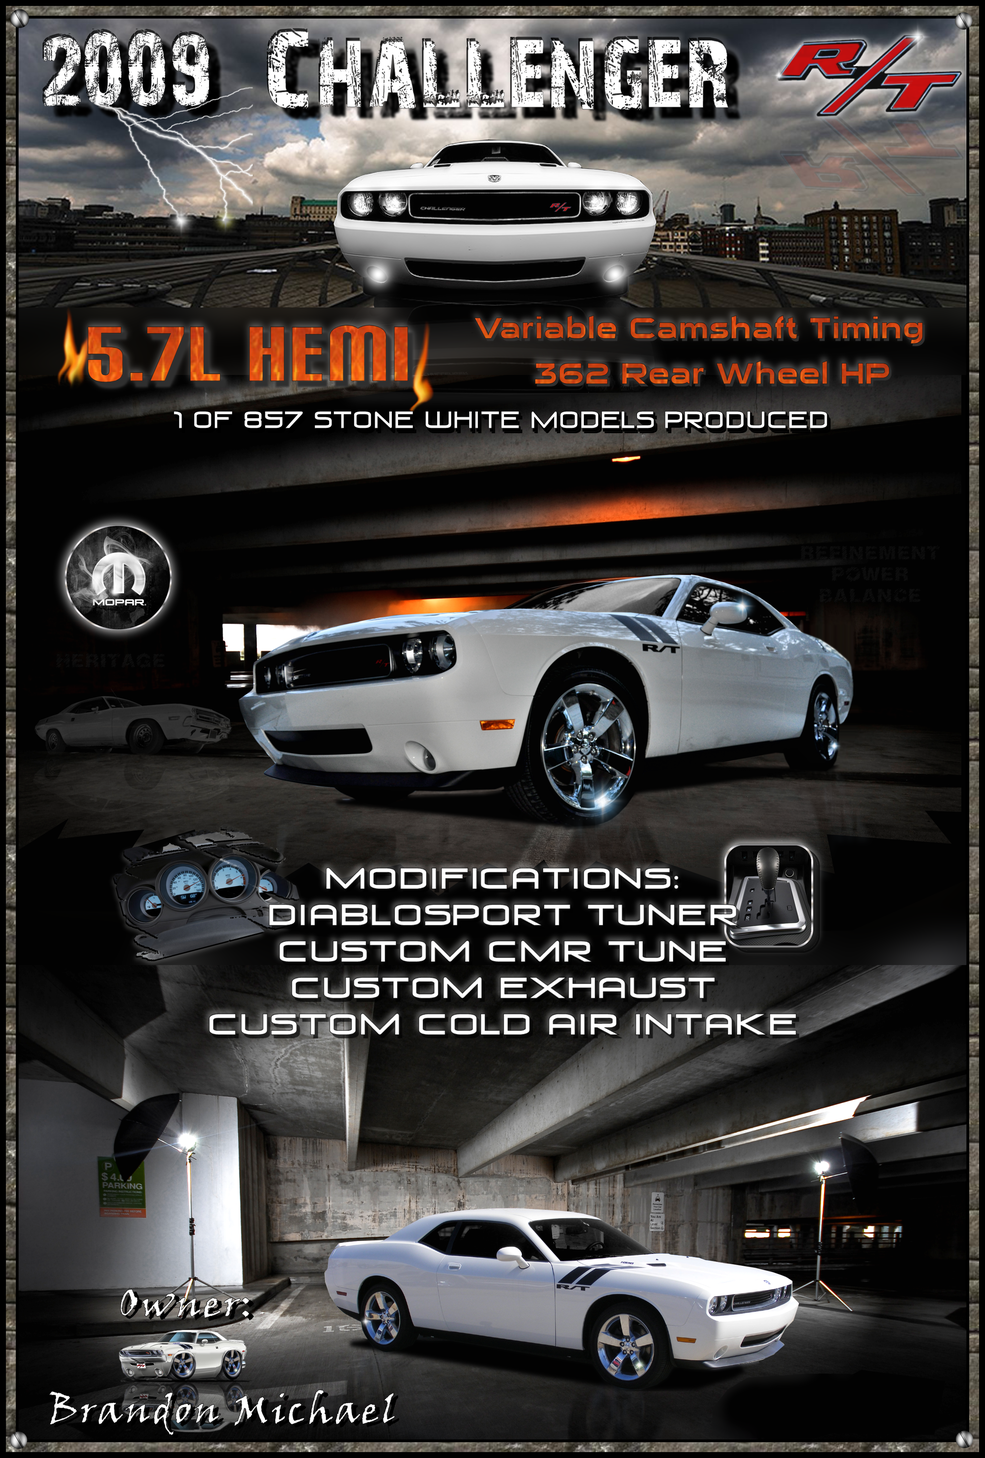 Custom Car Show Posters and 24" x 36" Prints - Samples Jan31st521pmBrandonsposterFinal